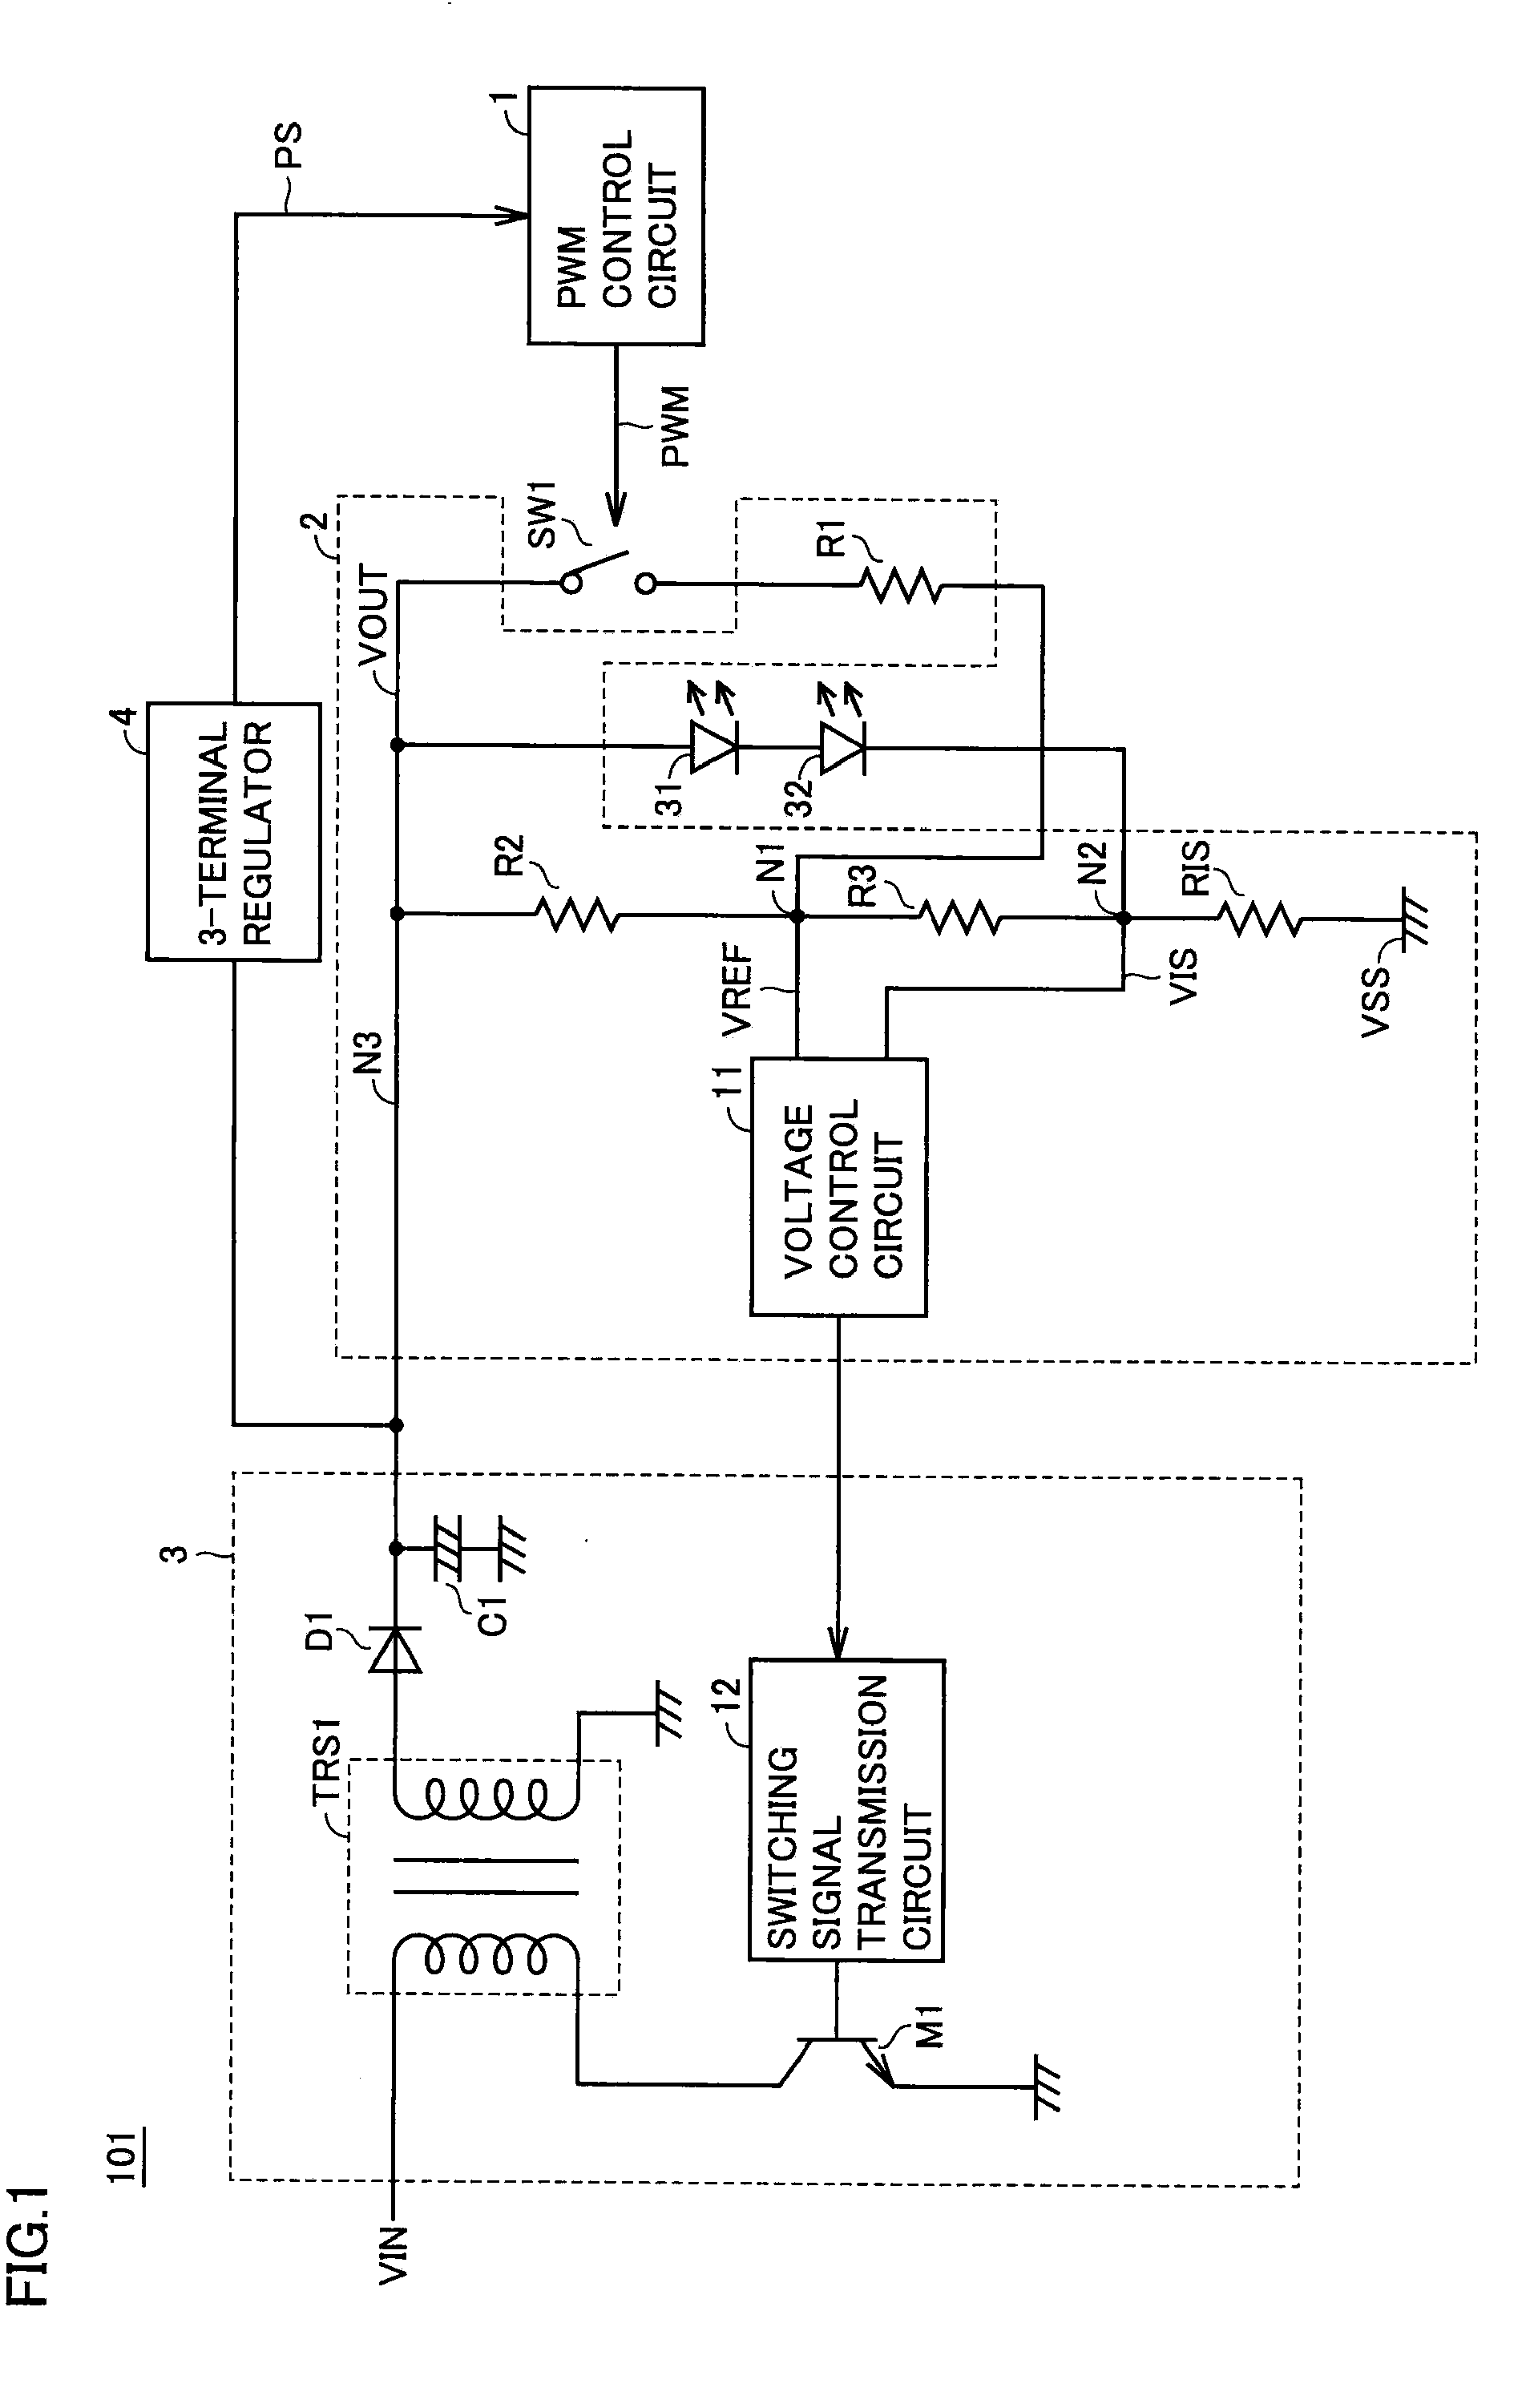 Driving Device for Providing Light Dimming Control of Light-Emitting Element